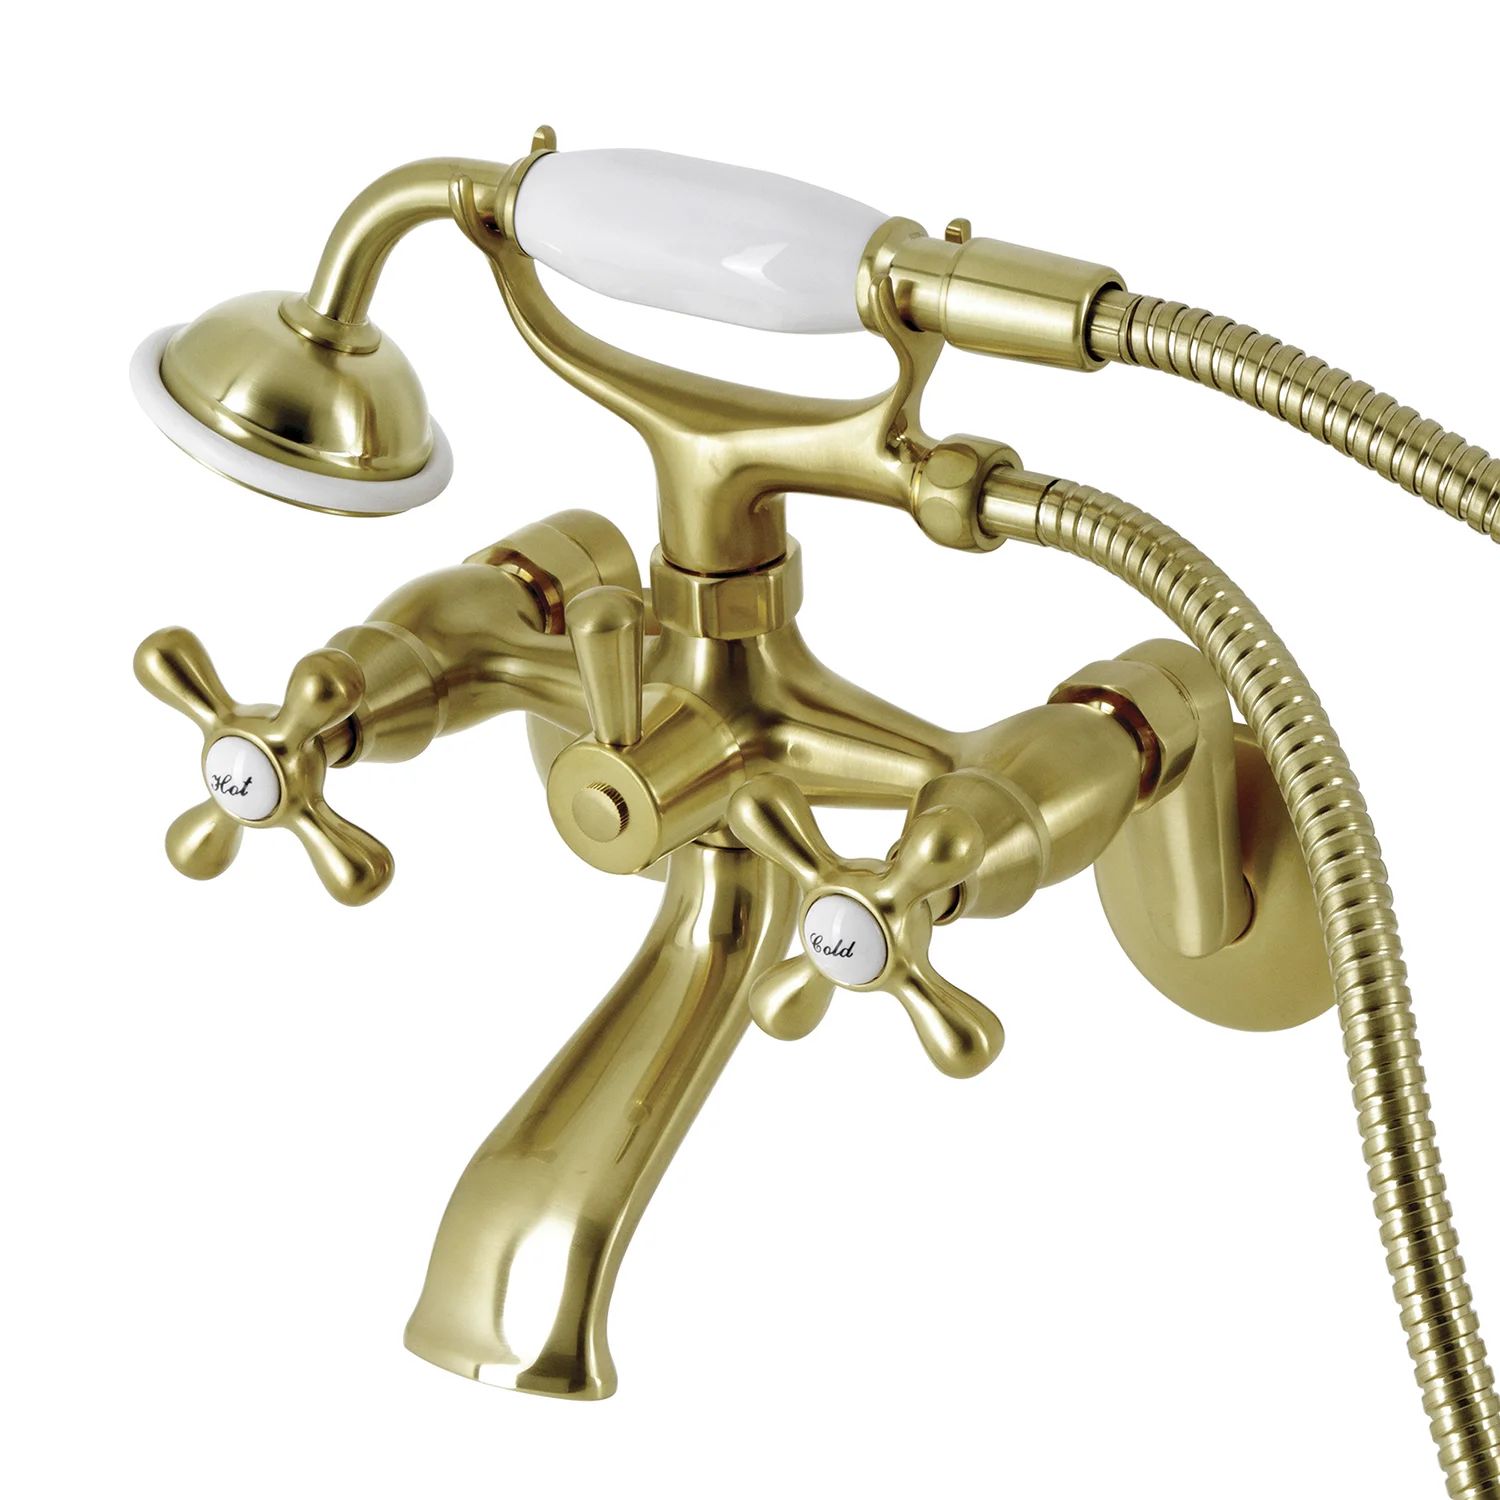 Kingston Triple Handle Wall Mounted Clawfoot Tub Faucet Trim with Diverter and Handshower | Wayfair North America